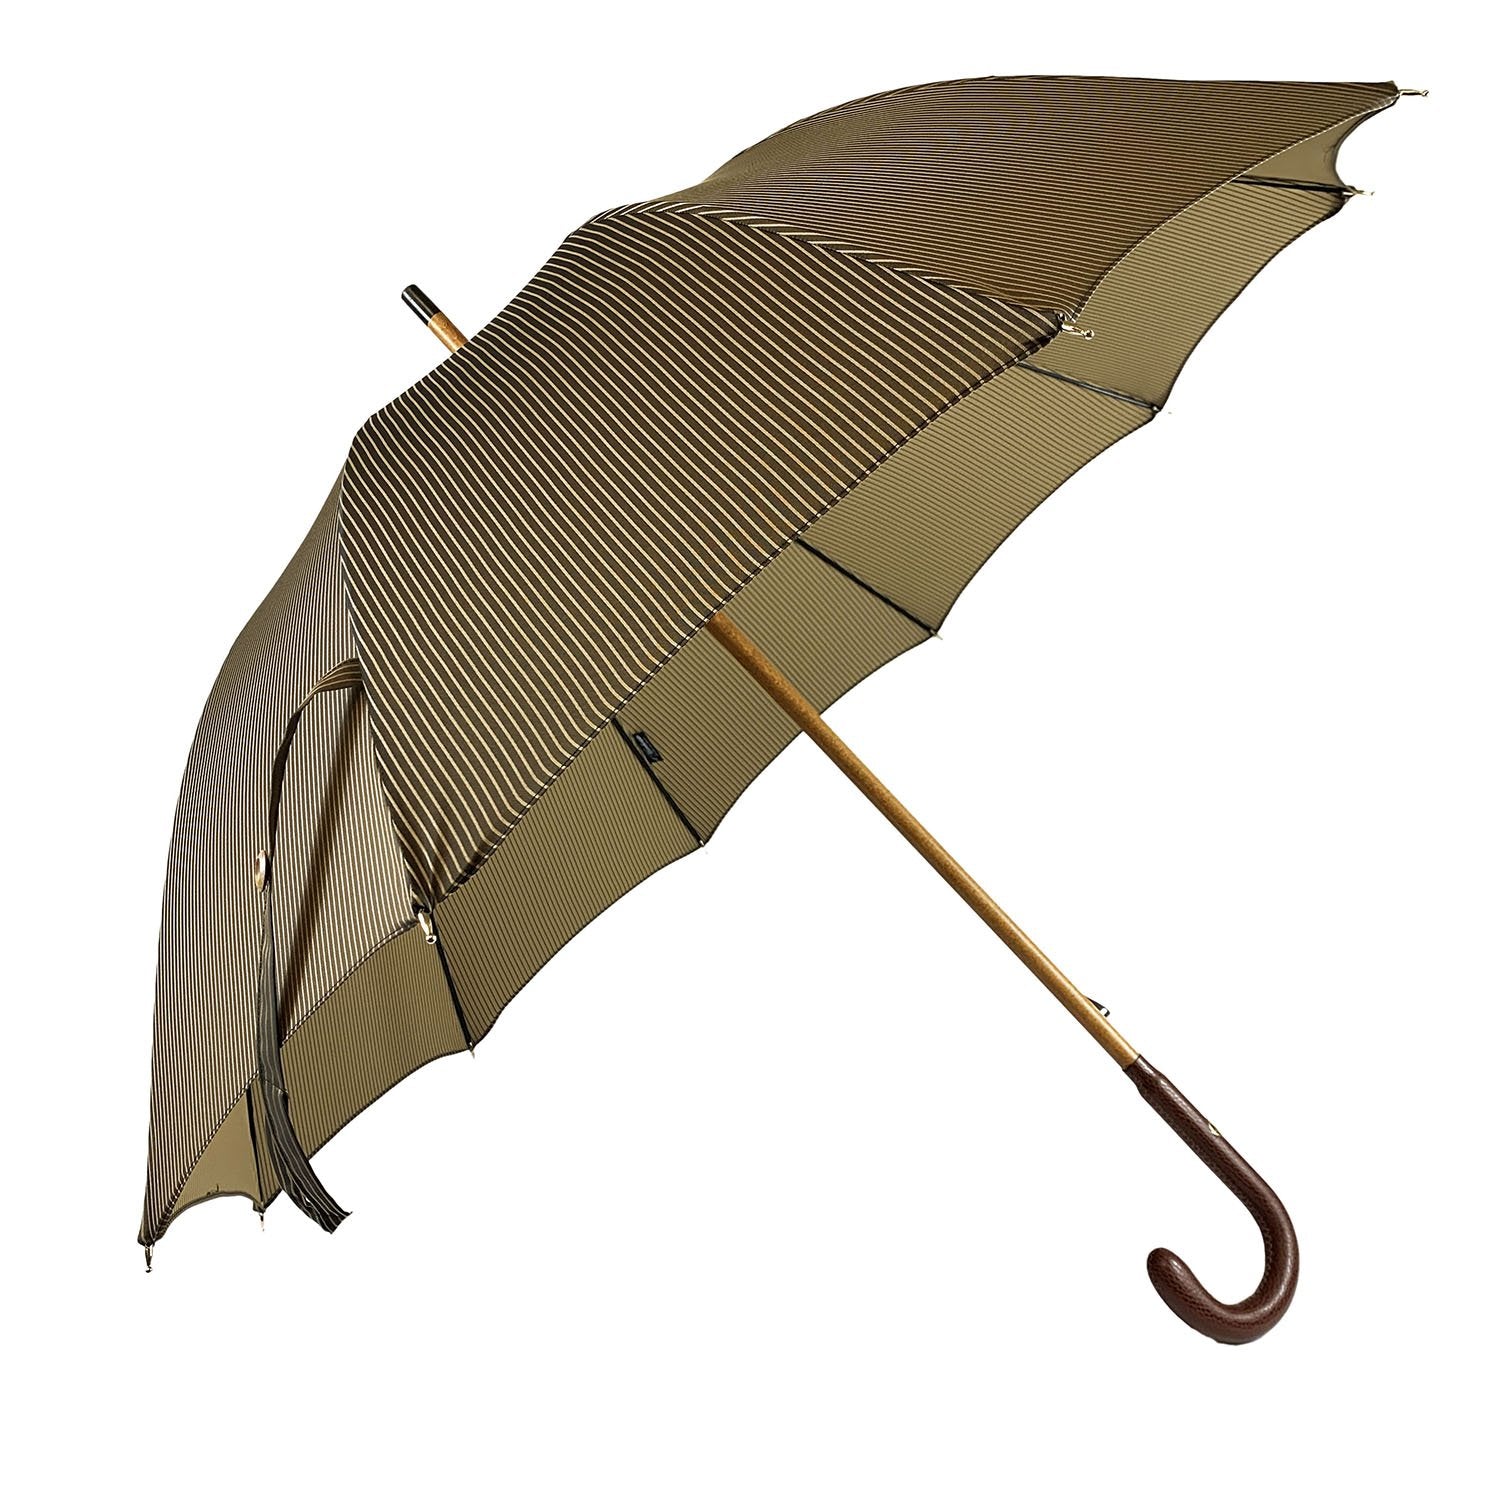 Classic Striped umbrella with Brown Leather handle - IL MARCHESATO LUXURY UMBRELLAS, CANES AND SHOEHORNS